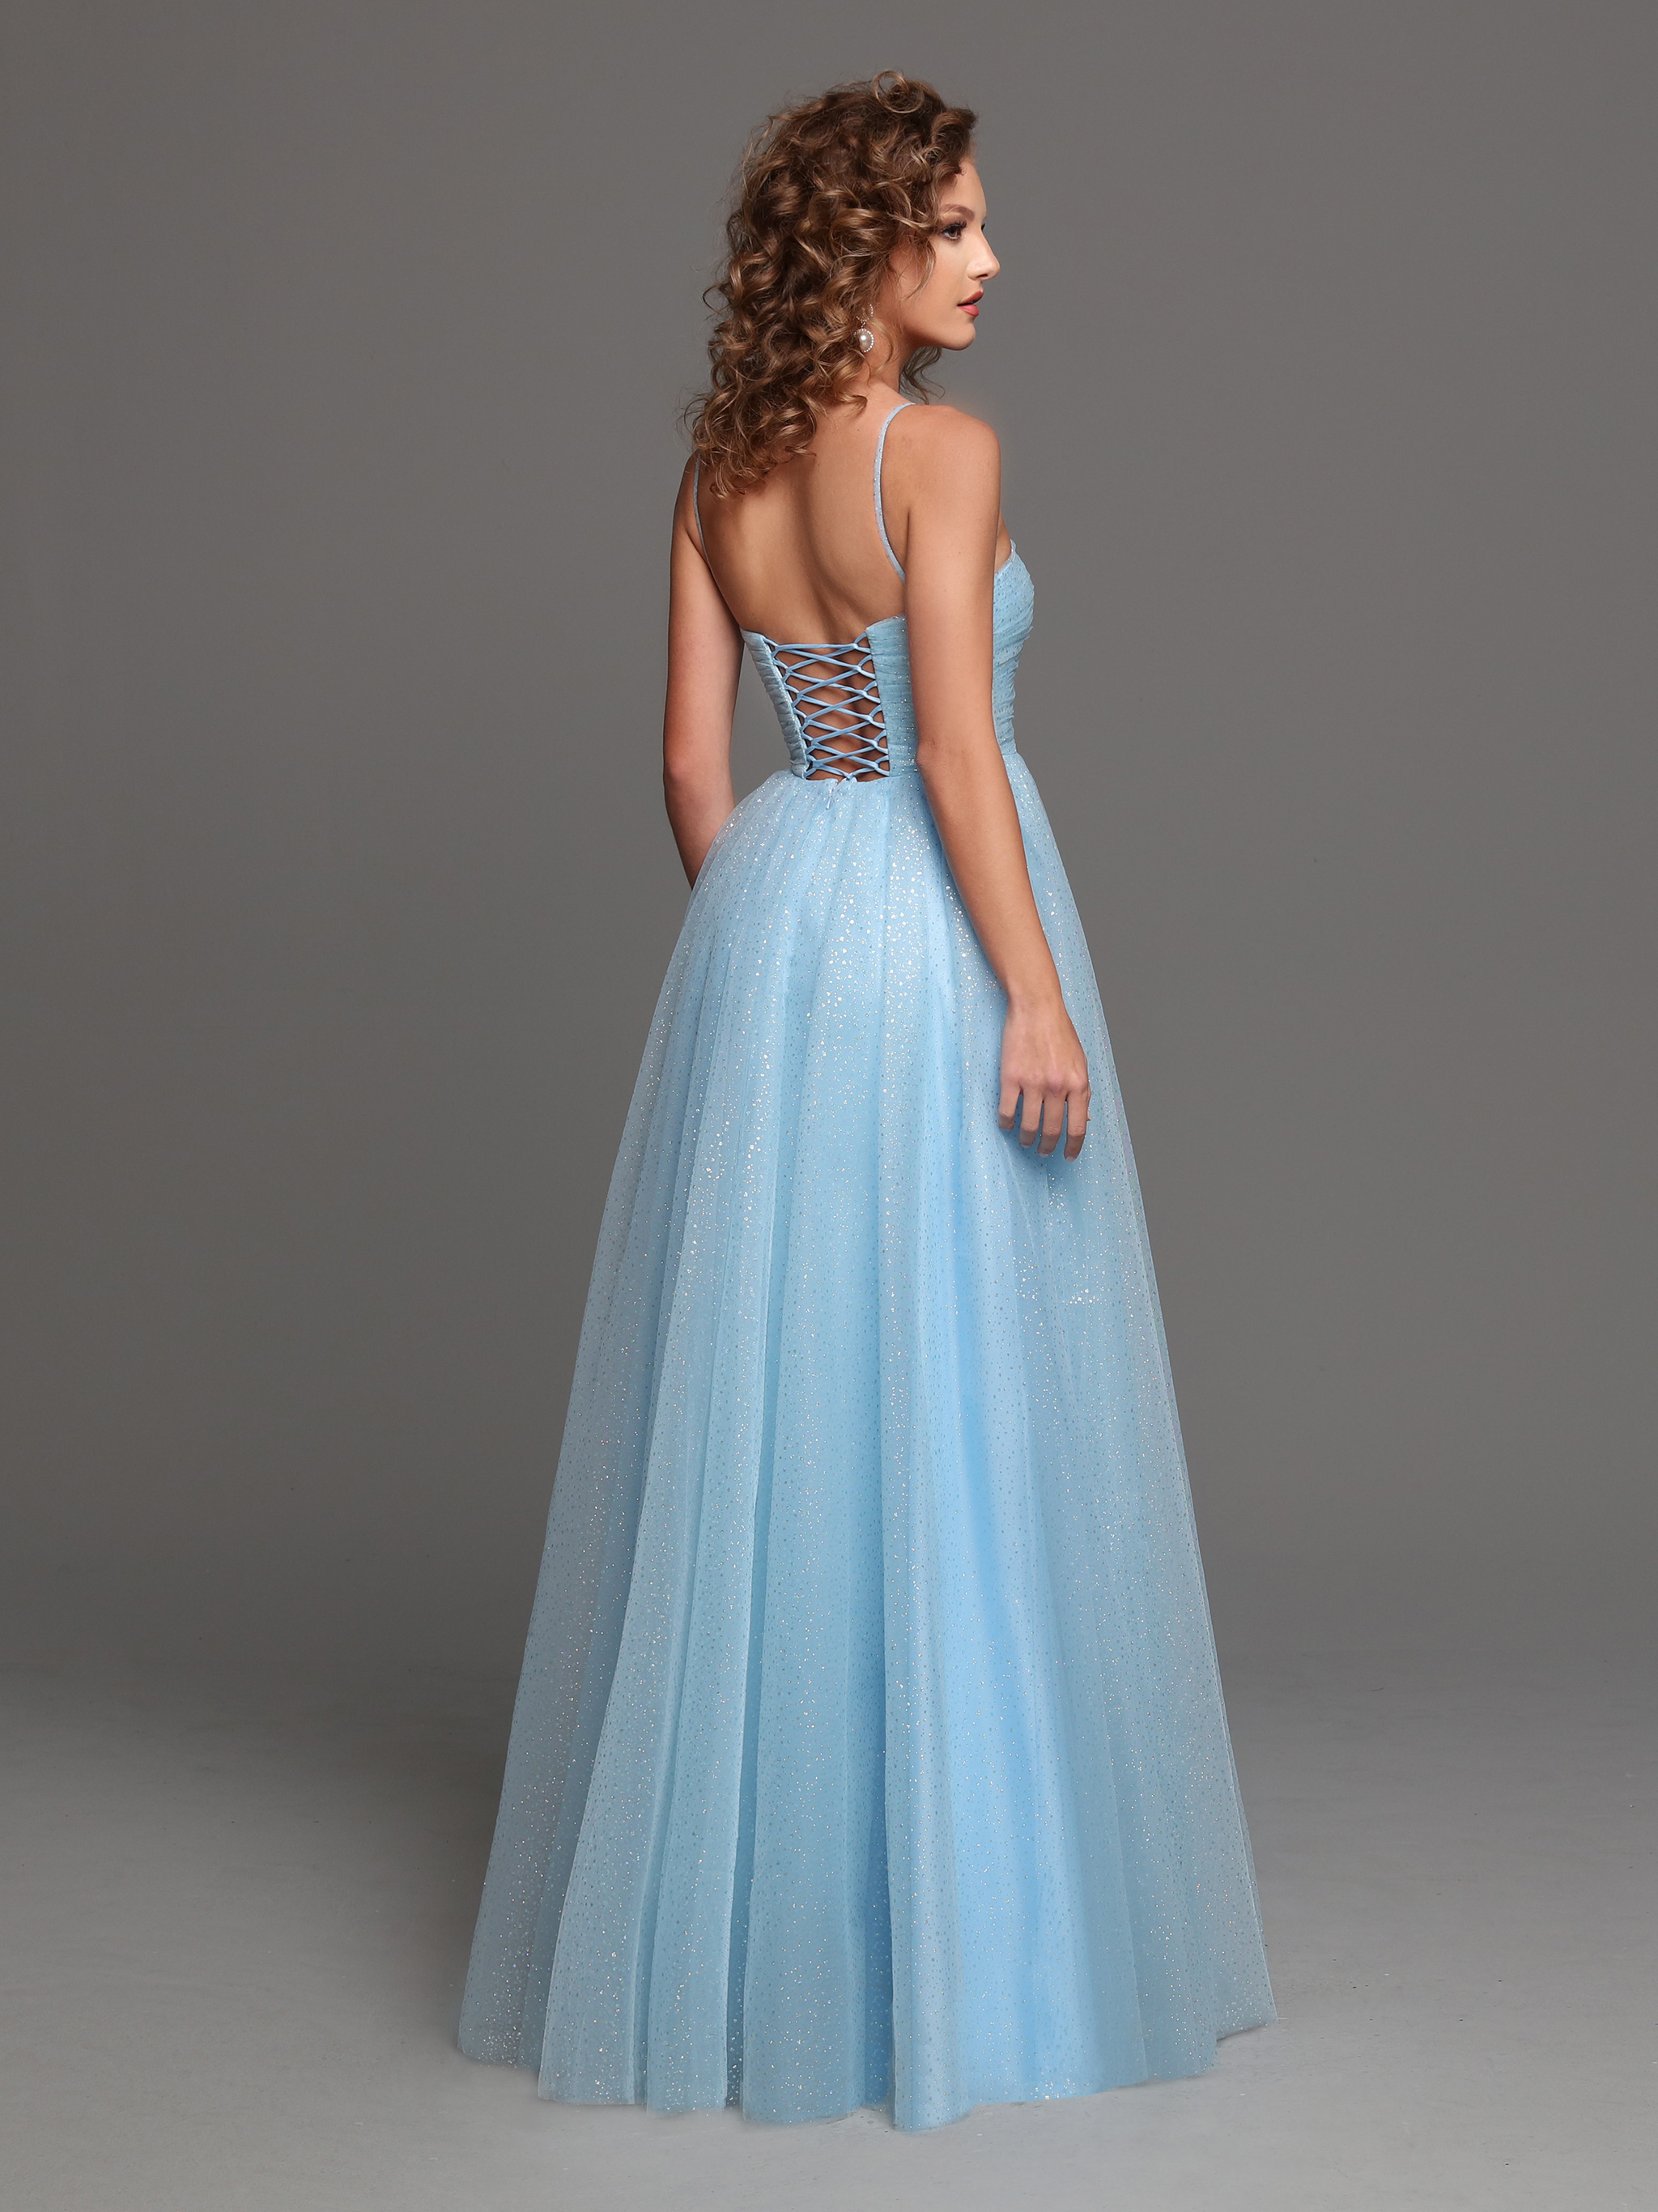 Image showing back view of style #72250